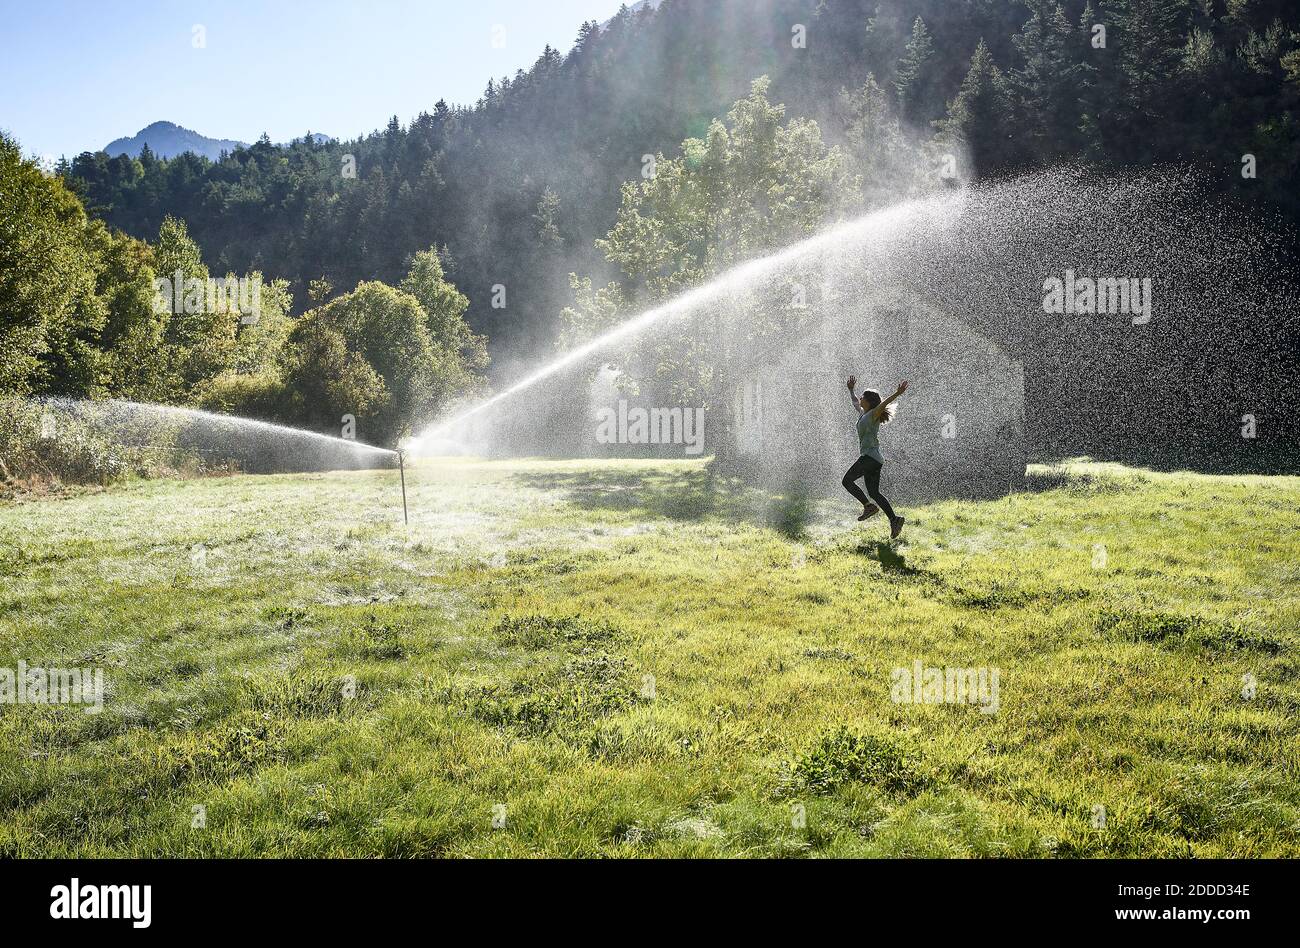 Woman jumping on grass near sprinkler during sunny day Stock Photo